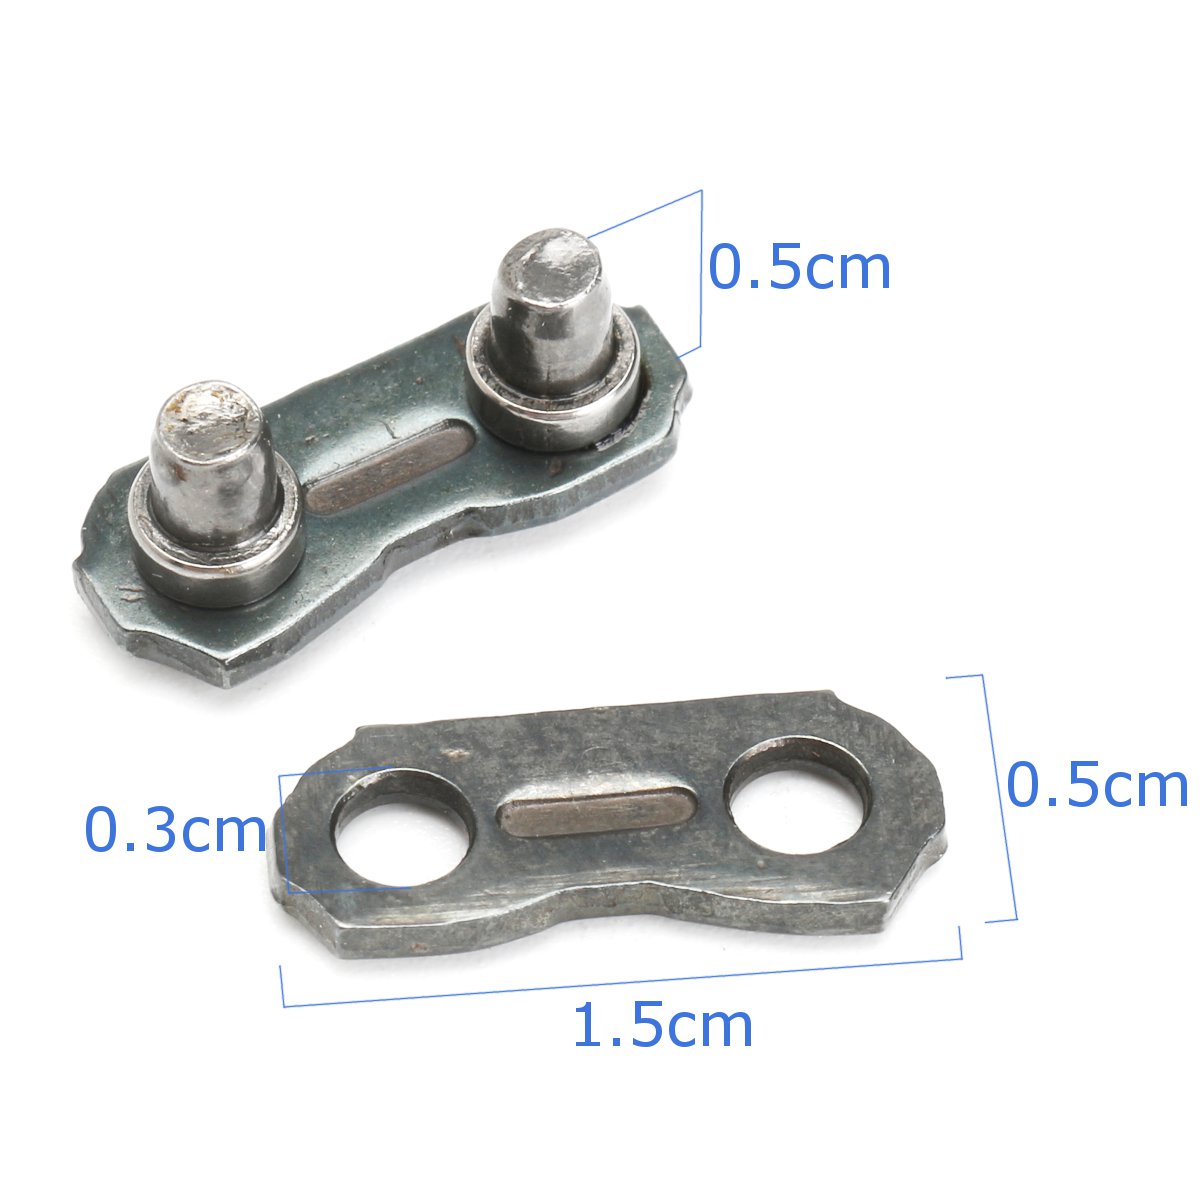 Portable-Drive-Link-Chain-Saw-Mill-Chain-Chain-Saw-Connector-for-Smooth-Cutting-Blade-Tools-1233437